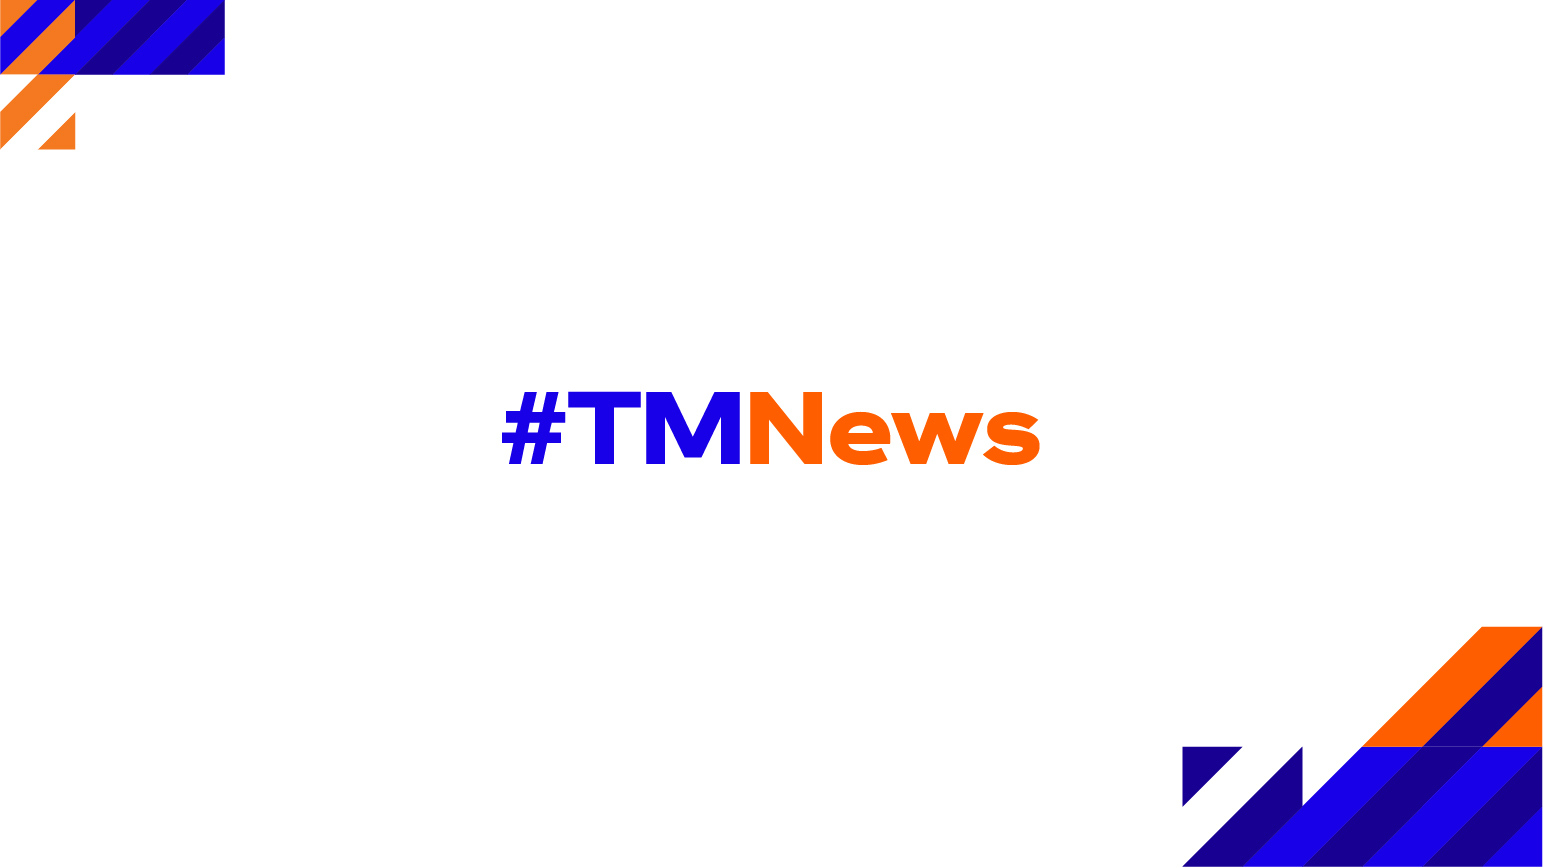 TM CONFIRMS NO SERVICE DISRUPTION AMIDST GLOBAL TECH OUTAGE LINKED TO CROWDSTRIKE